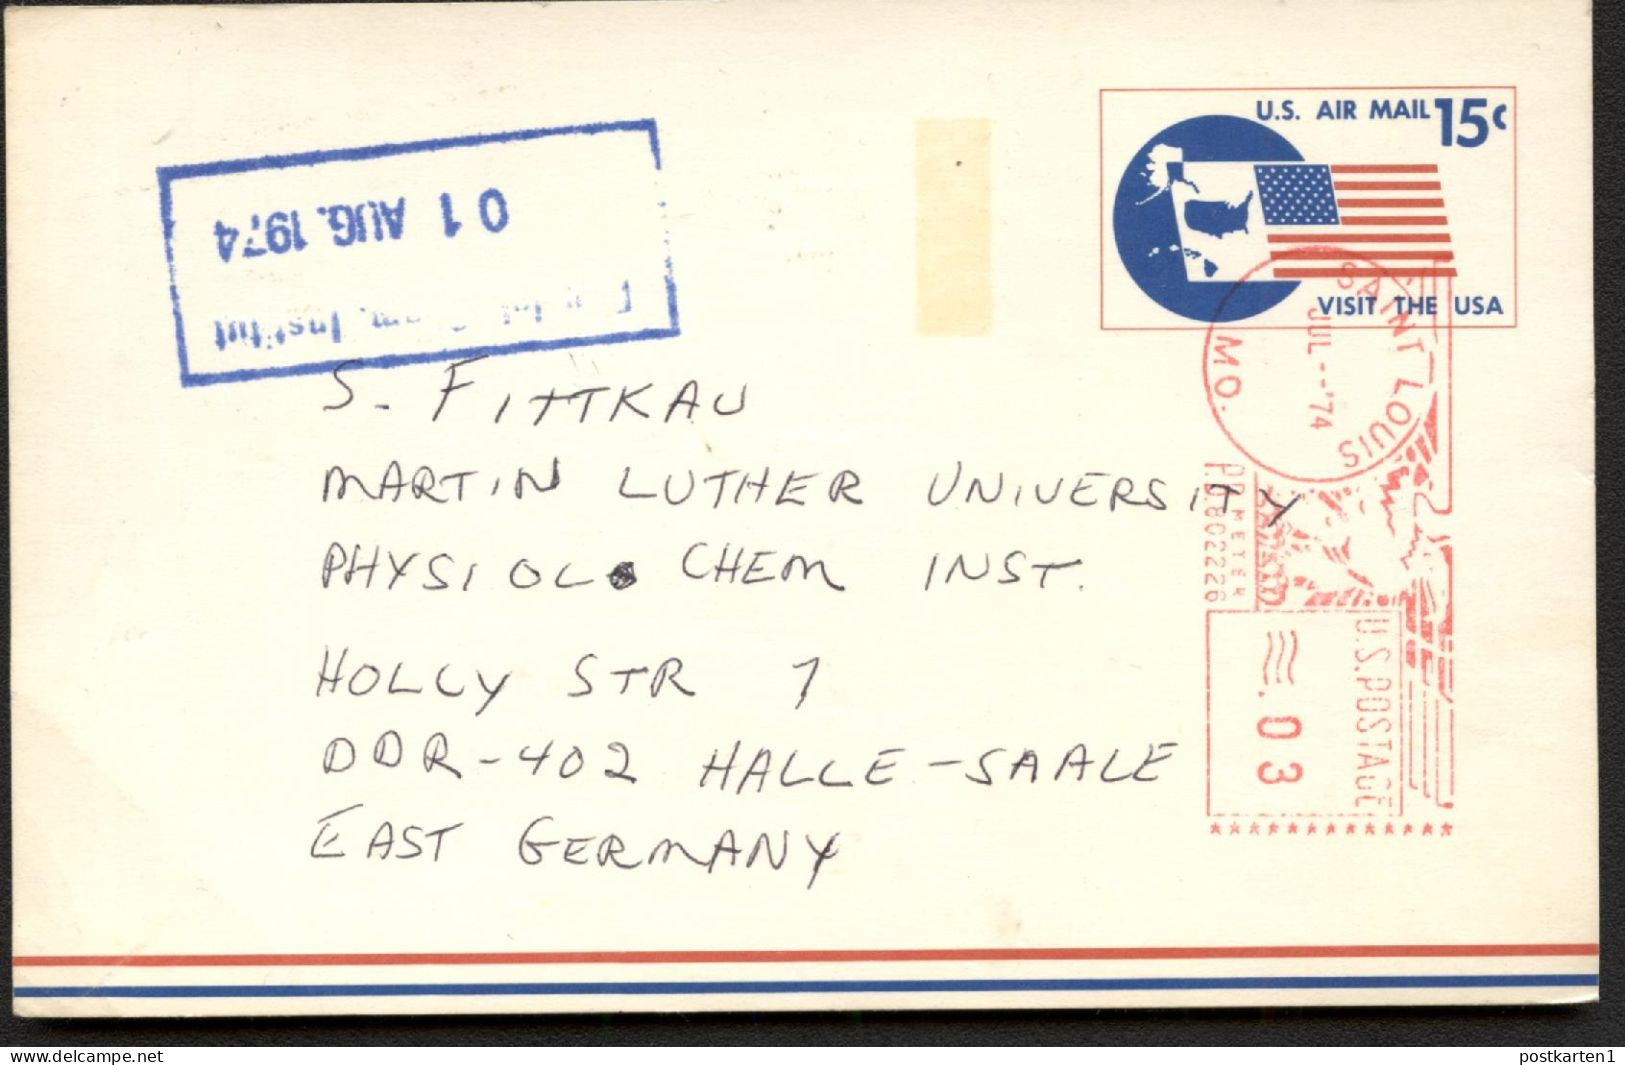 UXC11 Air Mail Postal Card Nonphilatelic Used Saint Loius MO To GERMANY 1974 - 1961-80